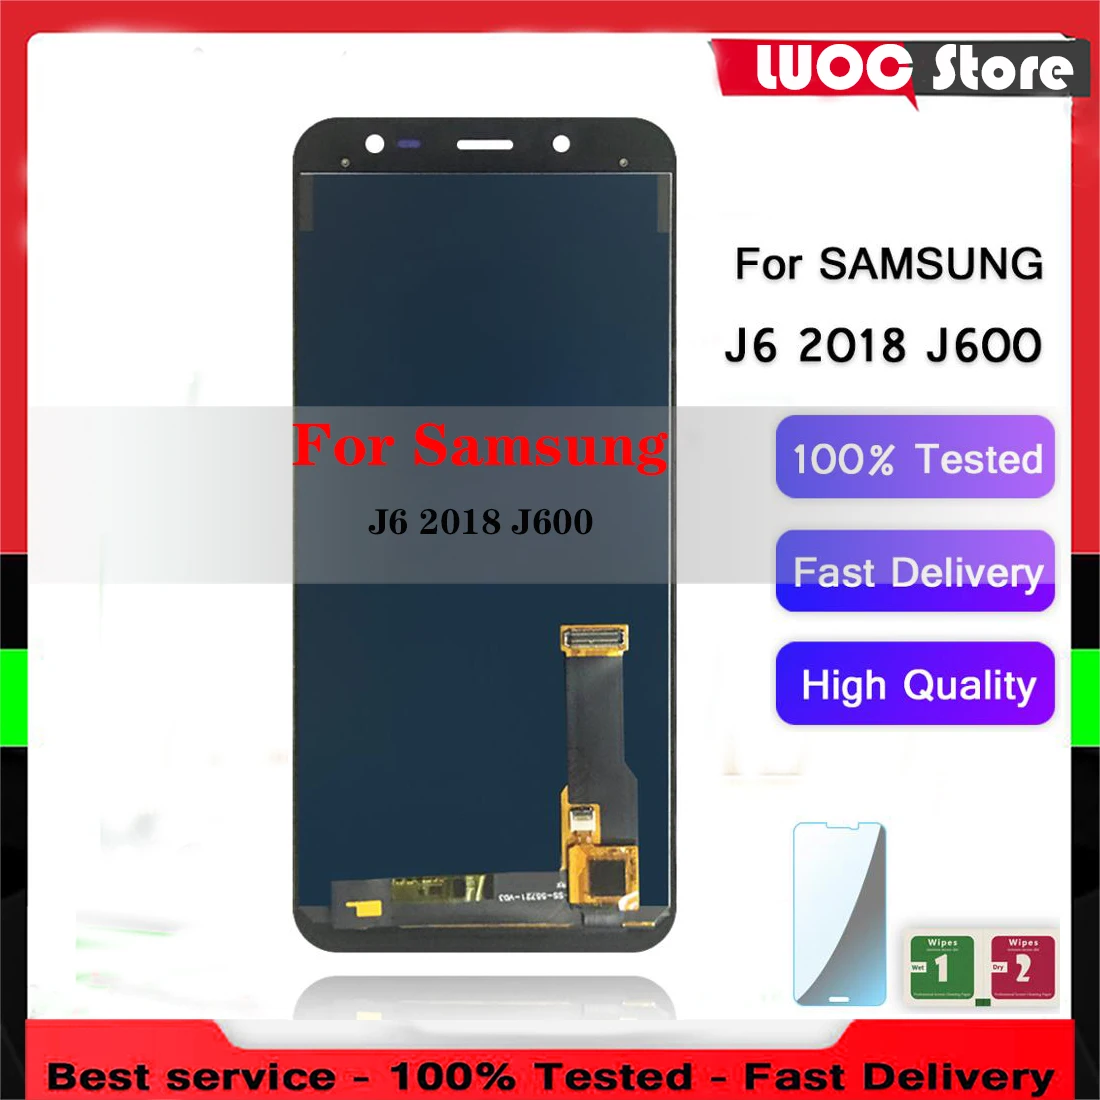 

10pcs For Samsung Galaxy J6 J600 2018 J600F J600F/DS J600G/DS LCD Display Touch Screen Adjust Brightness laptop Replacement Part